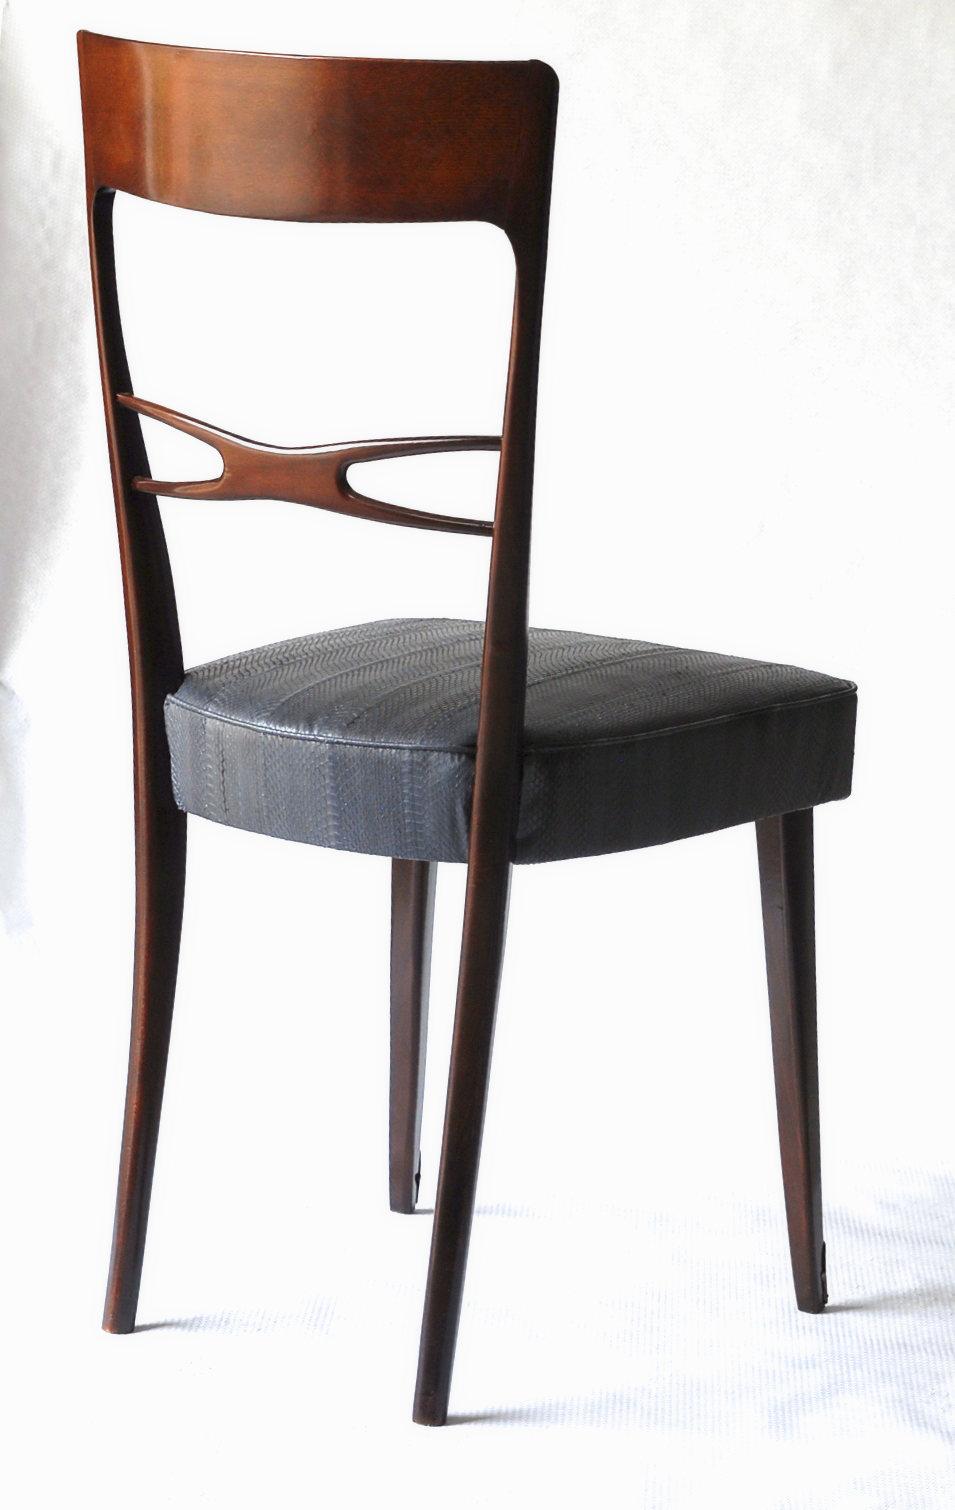 Velvet Melchiorre Bega Six Dining Chairs Glossy Finish, water snake skin box seated 50s